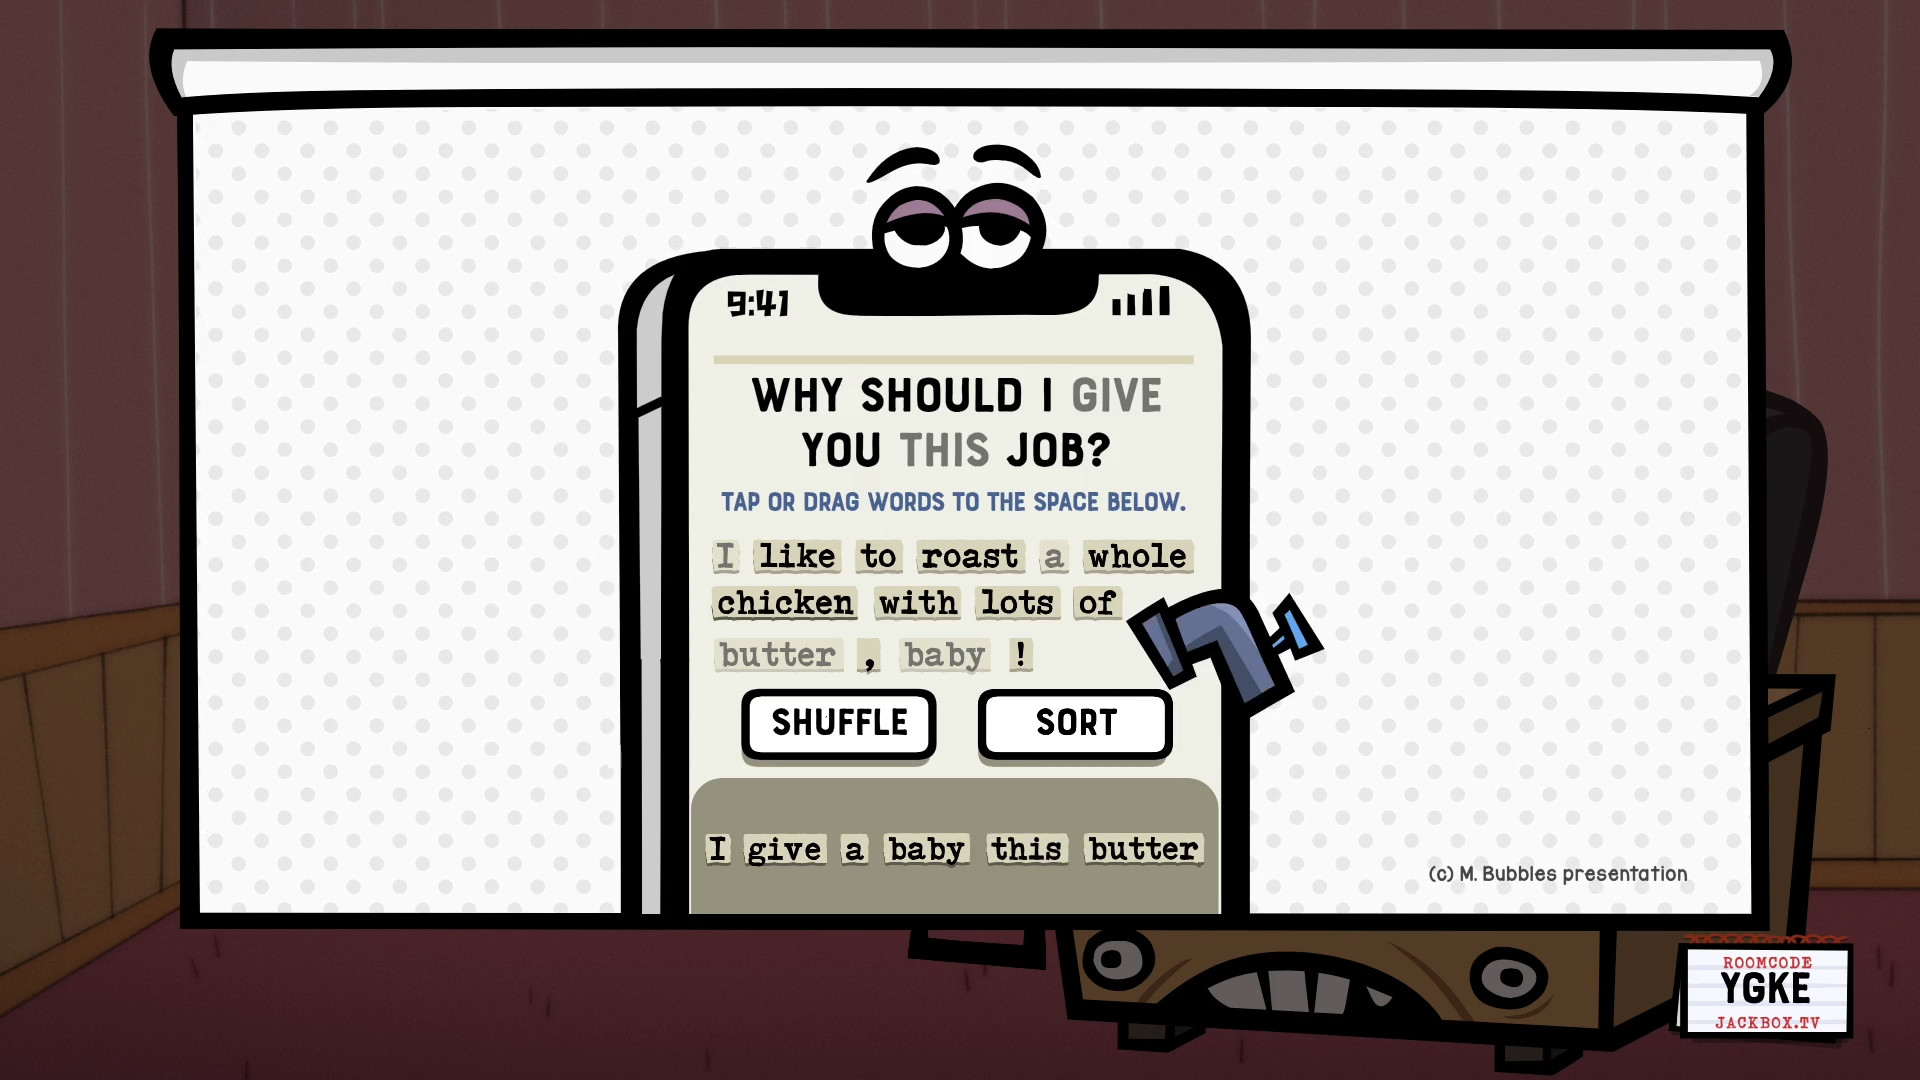 The Jackbox Party Pack 8 Steam Altergift